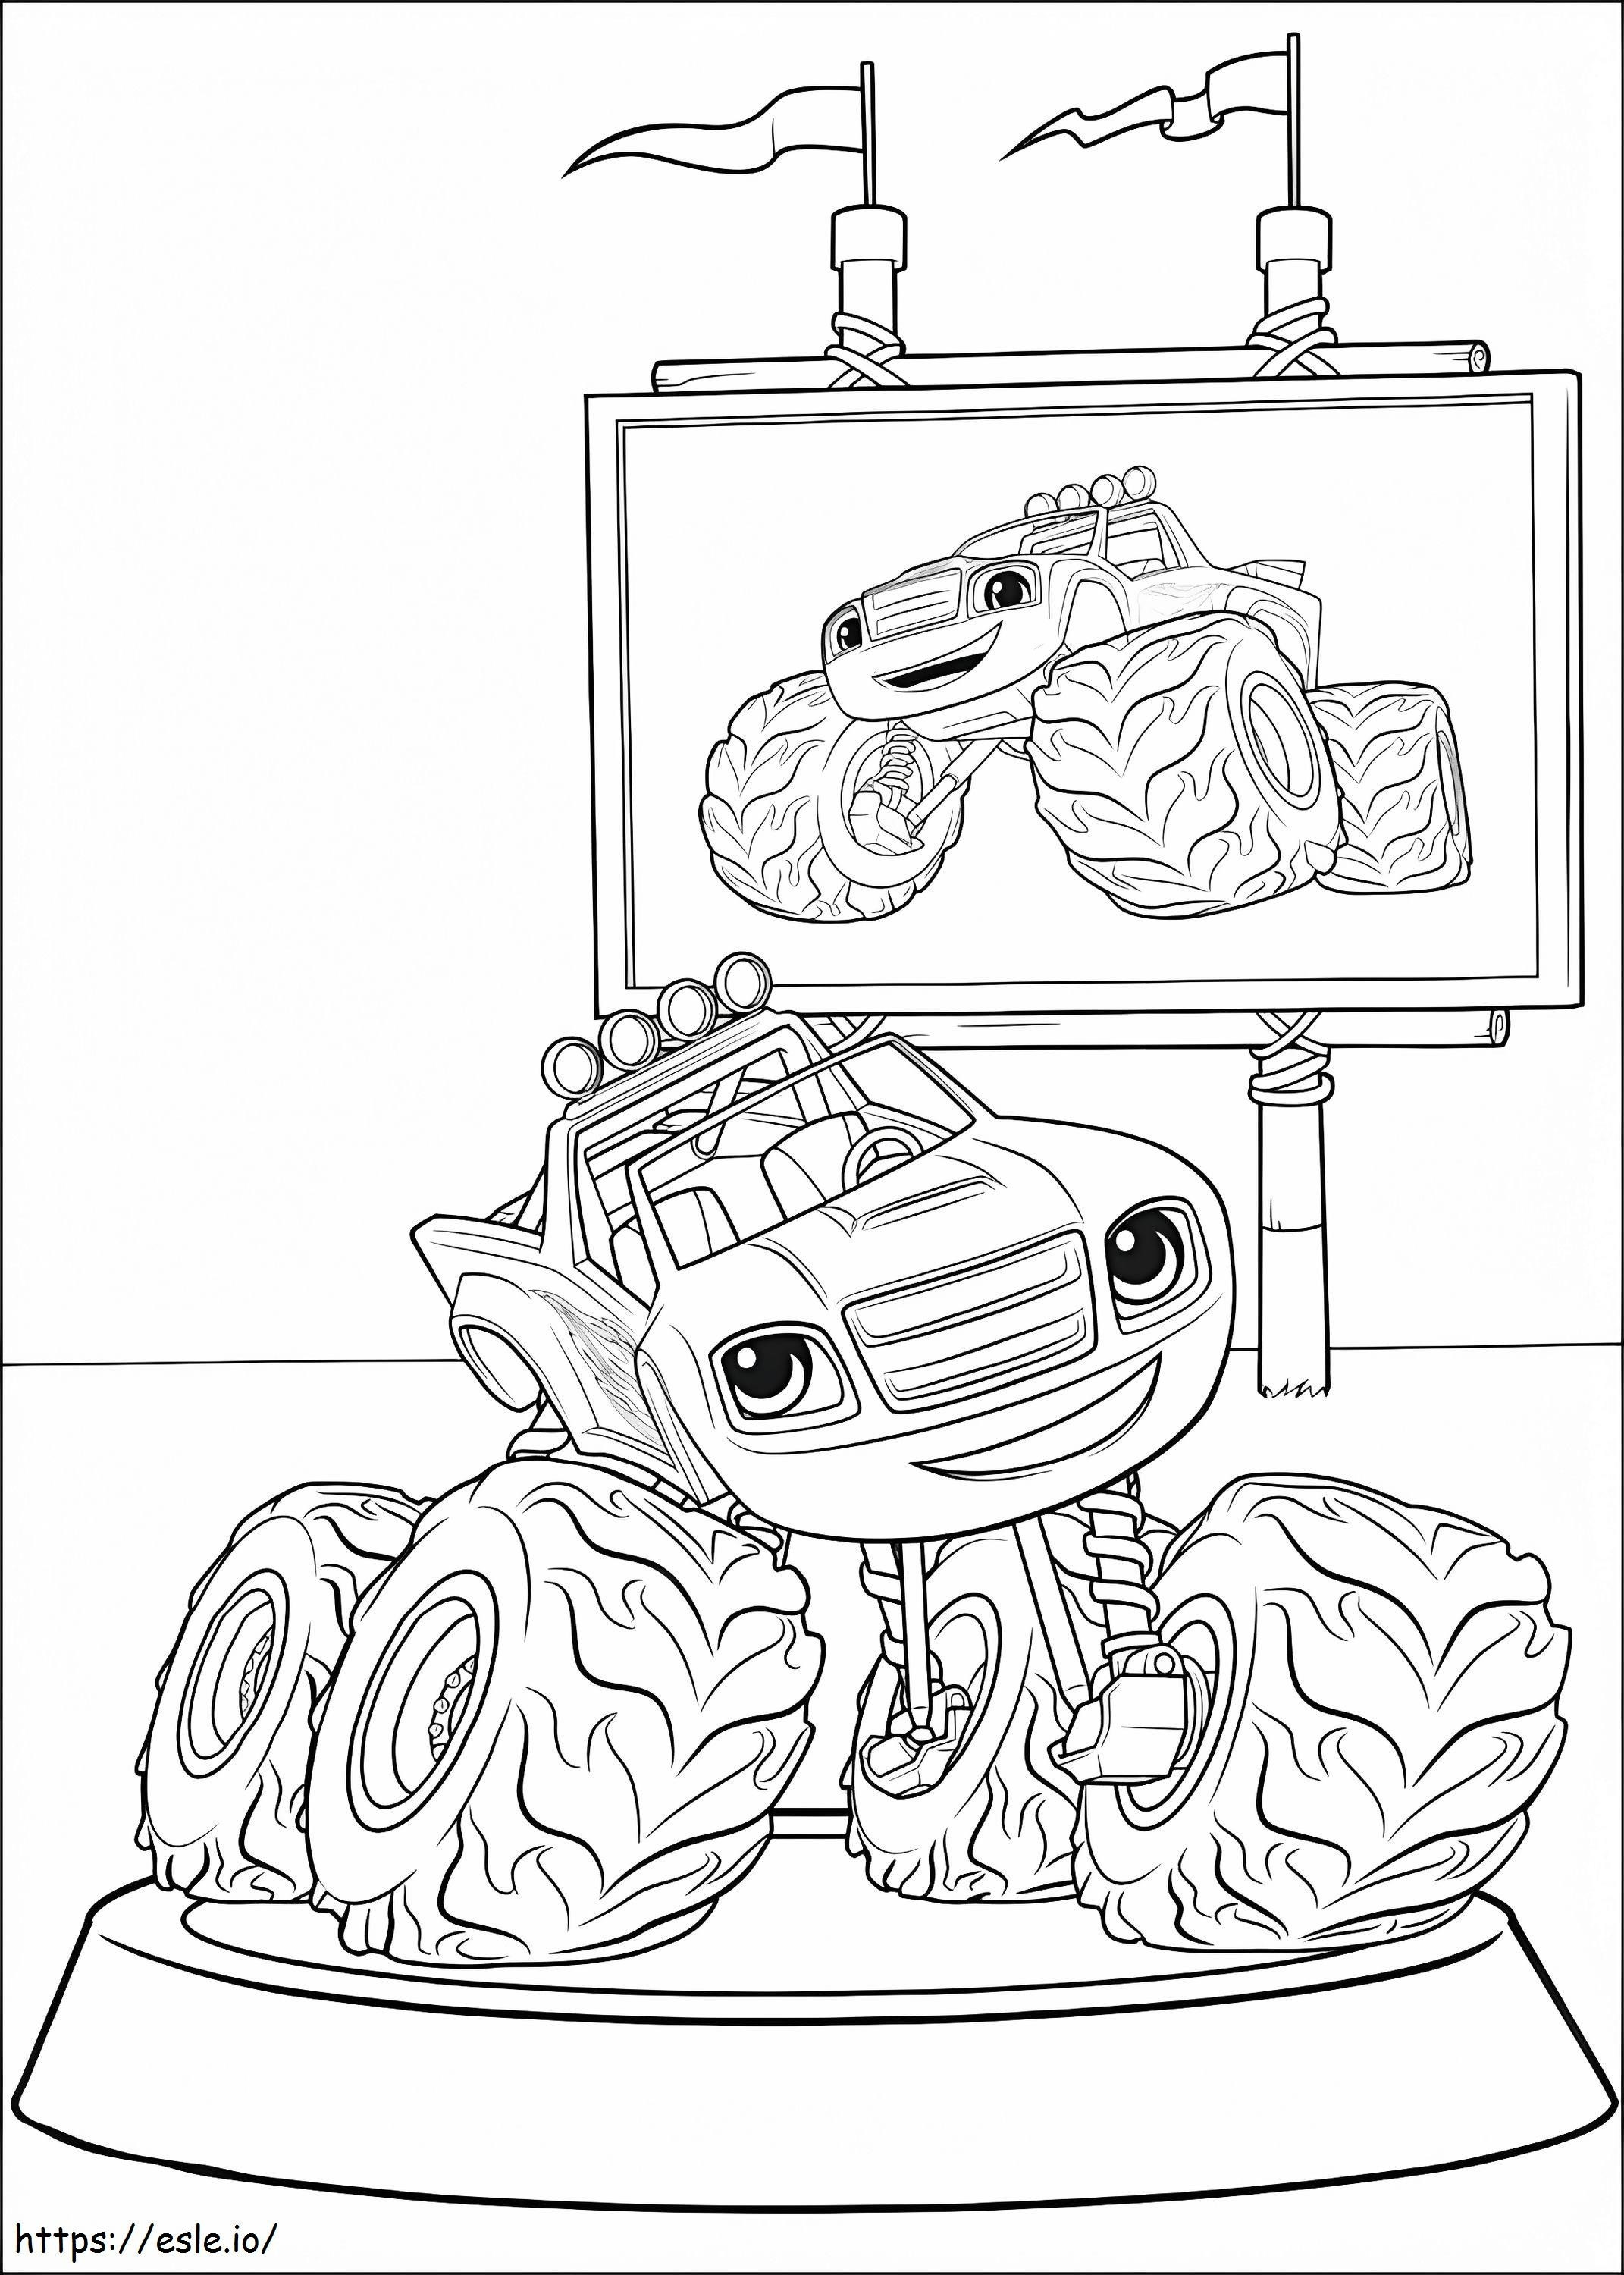 1533873748 Blaze On The Screen A4 coloring page